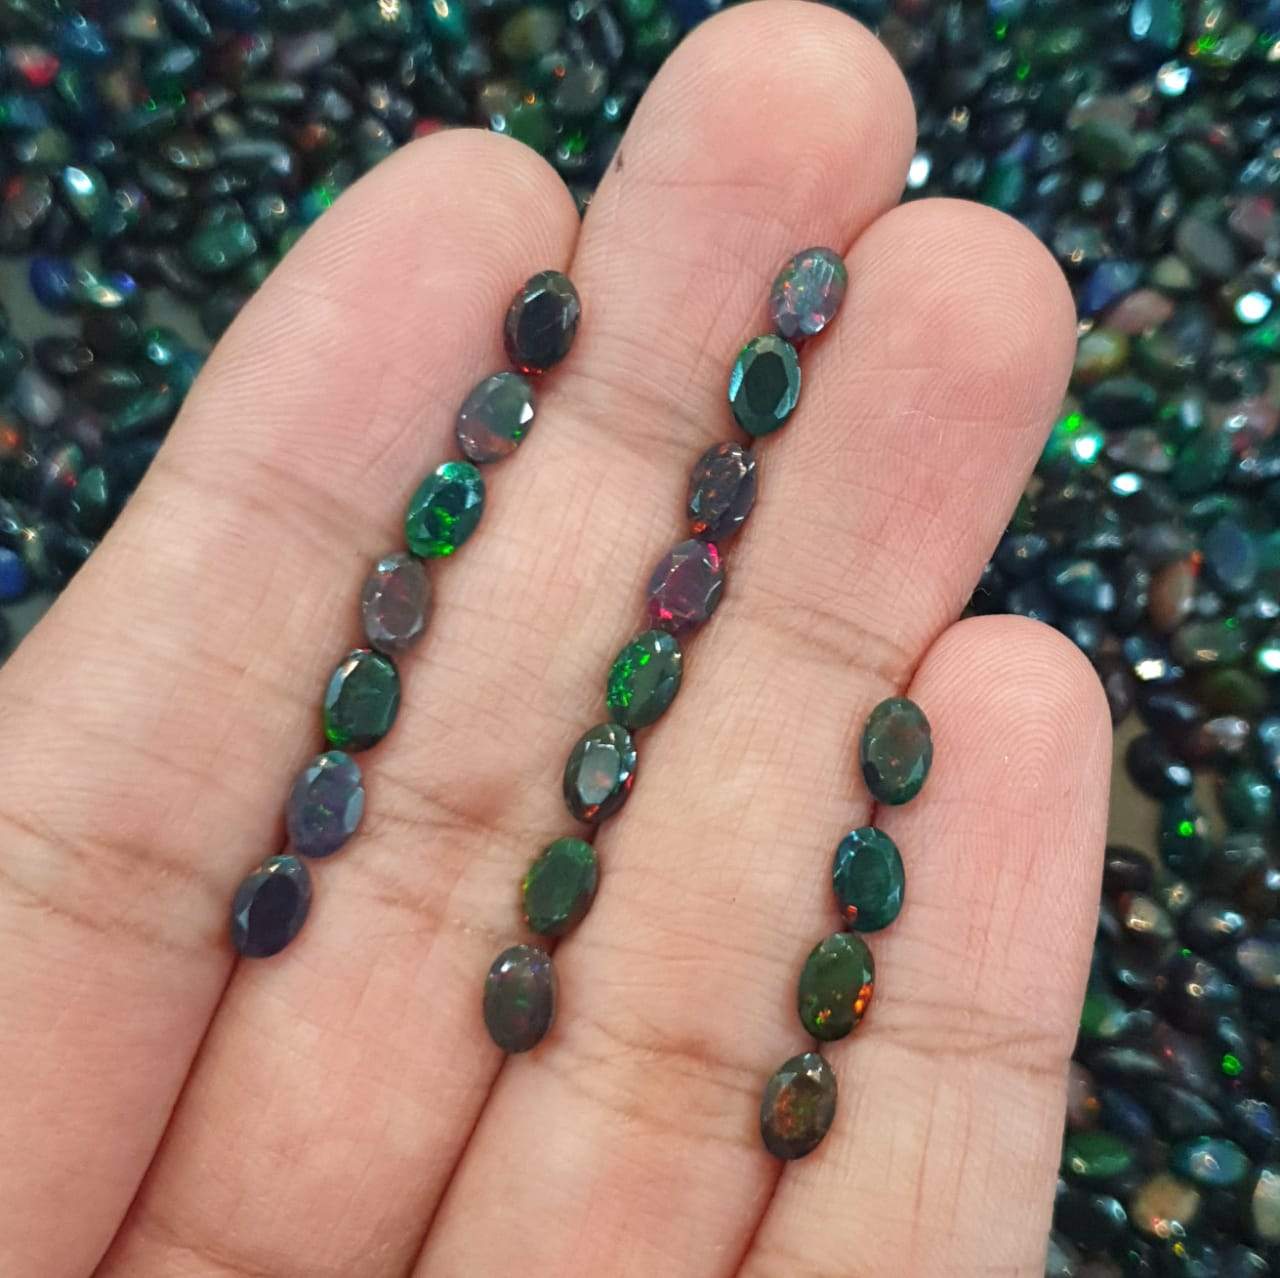 14 Pcs Natural Black Opal Ovals | Faceted in 6x4mm or 7x5mm Ovals - The LabradoriteKing